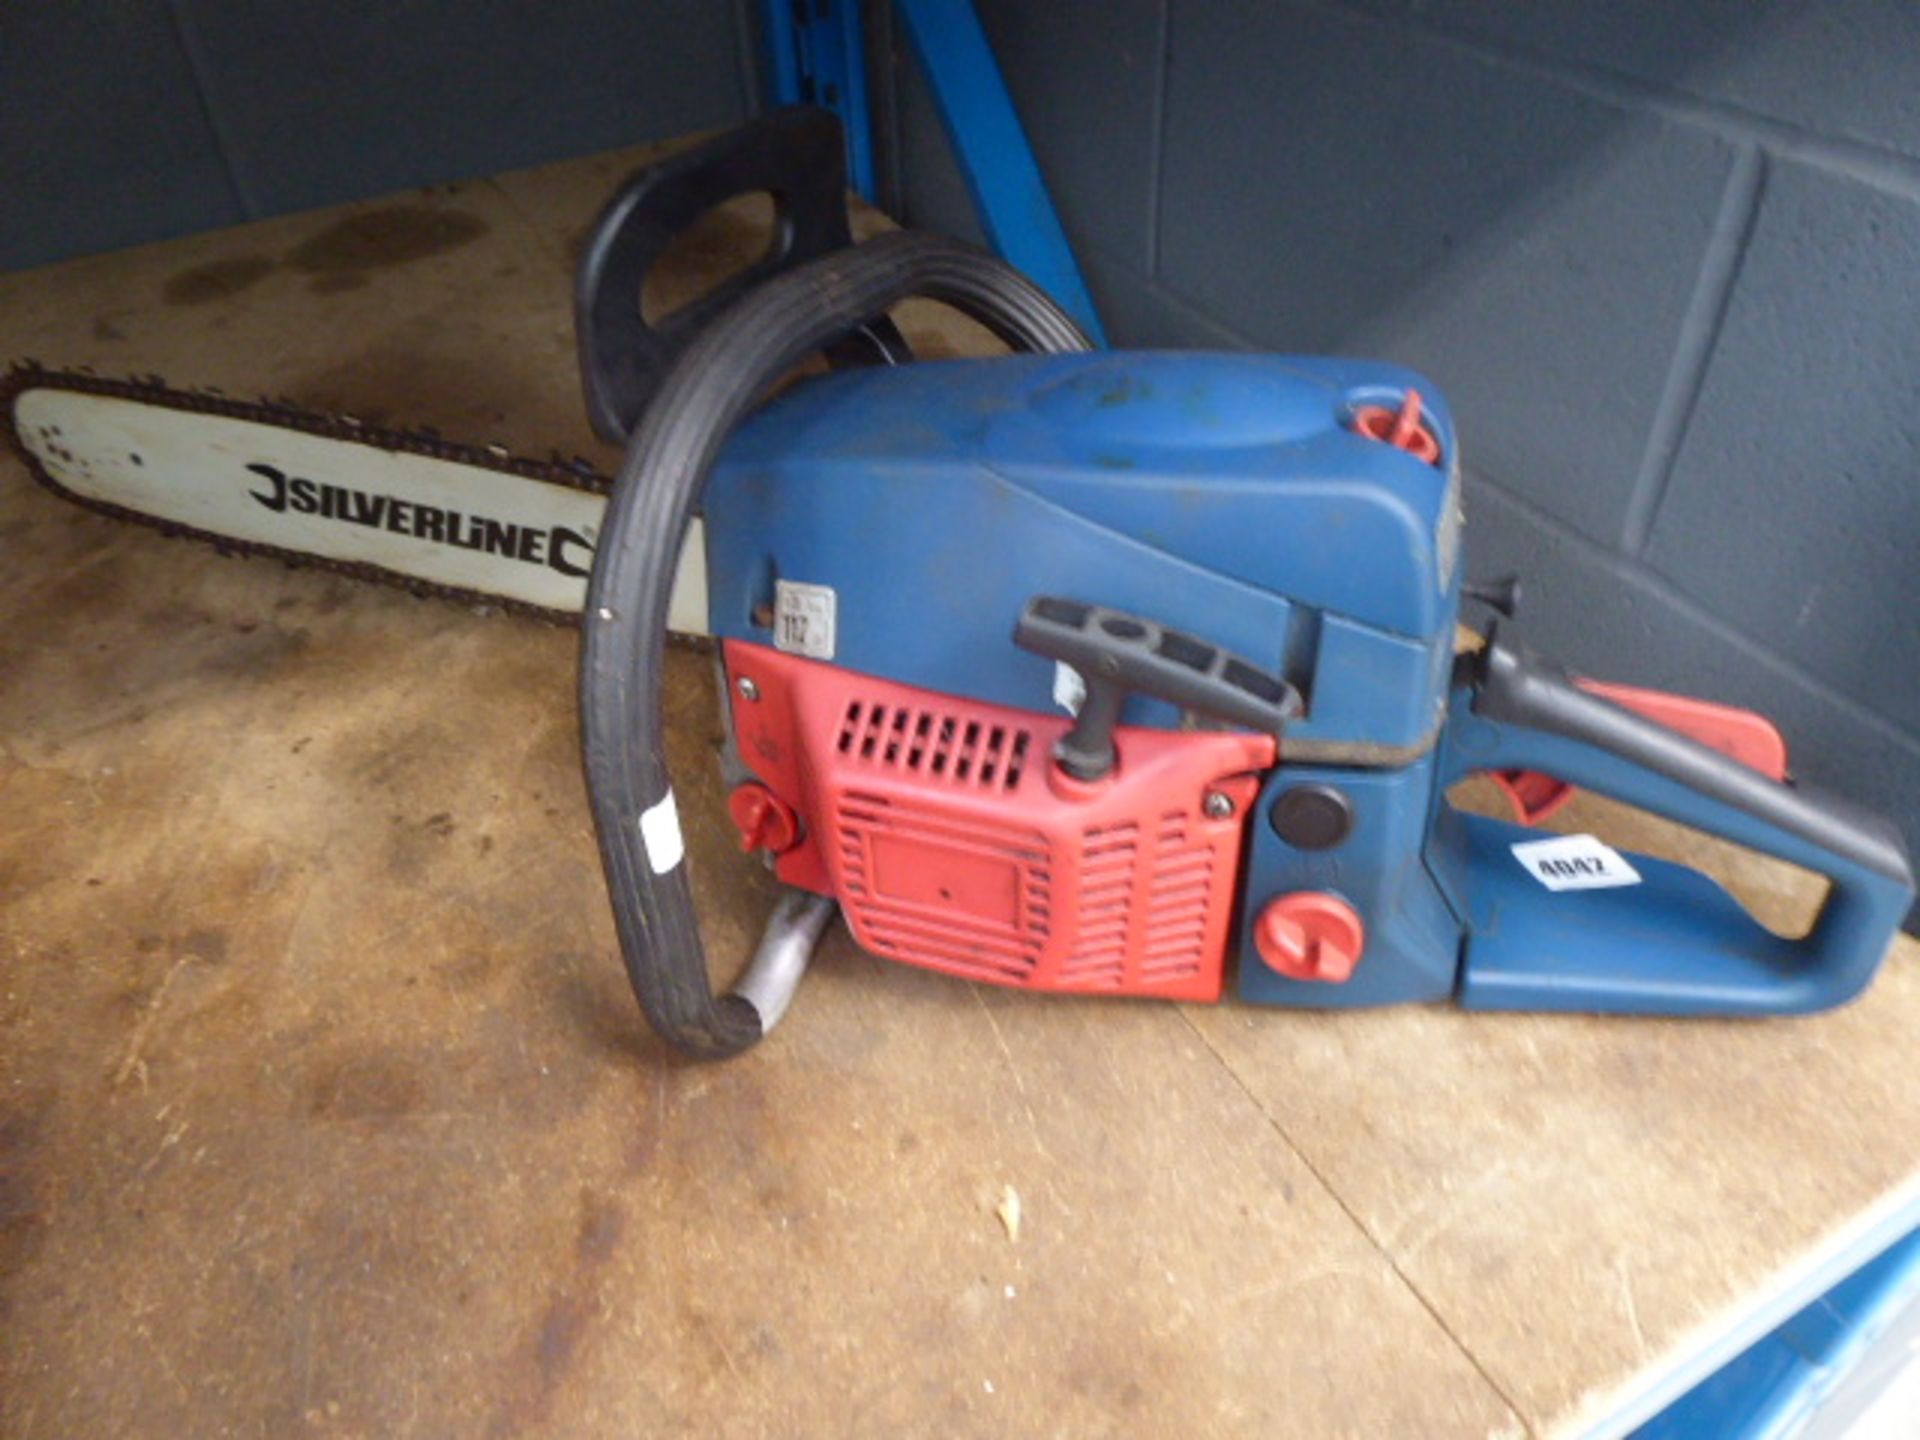 Silverline red and blue petrol powered chainsaw